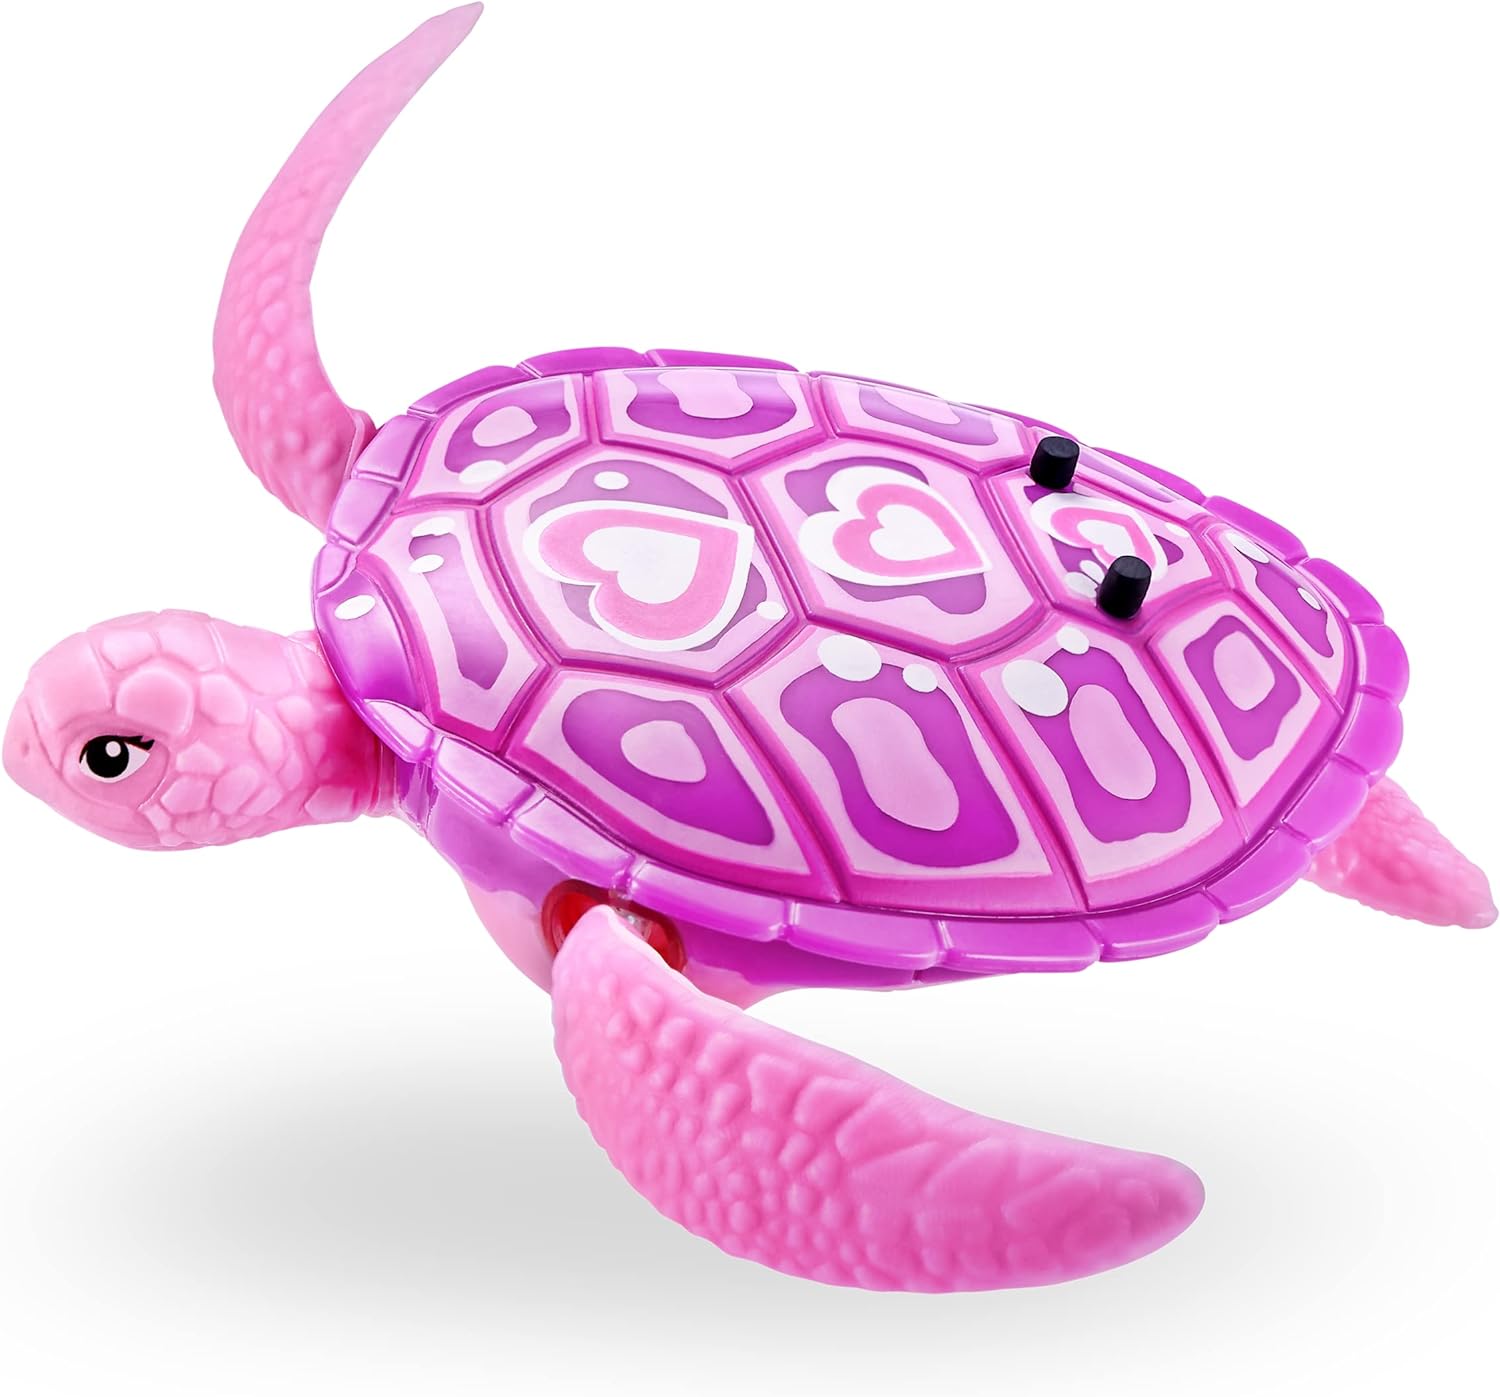 Robo Alive Robo Turtle Robotic Swimming Turtle (Orange + Blue) by ZURU Water Activated, Comes with Batteries, Amazon Exclusive (2 Pack)